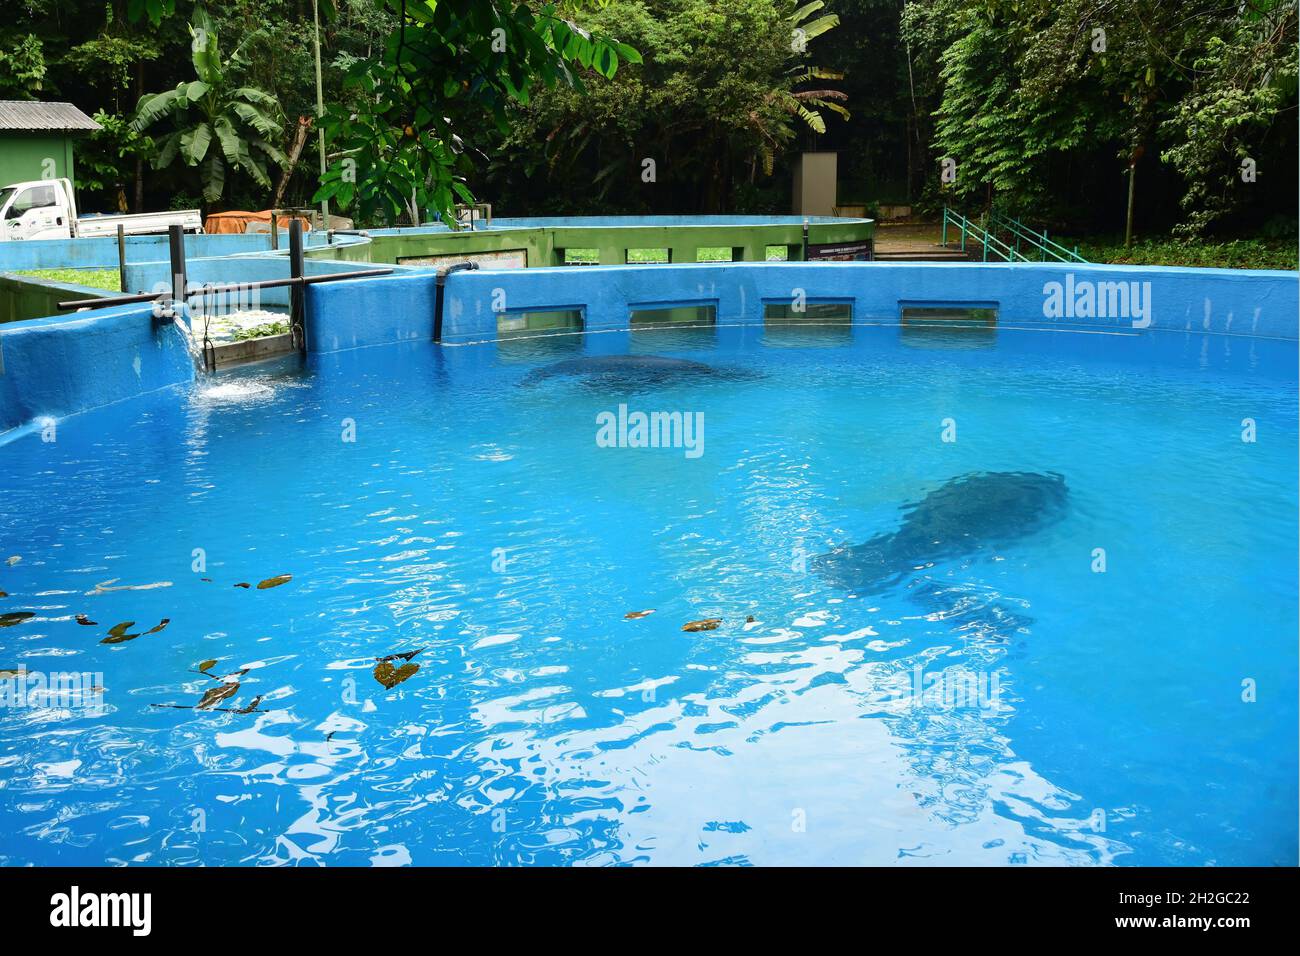 Ponds that occupied by orphaned baby manatees in Bosque da Ciencia before returning to their native habitat. Taken in Manaus, Brasil on May 30, 2019 Stock Photo